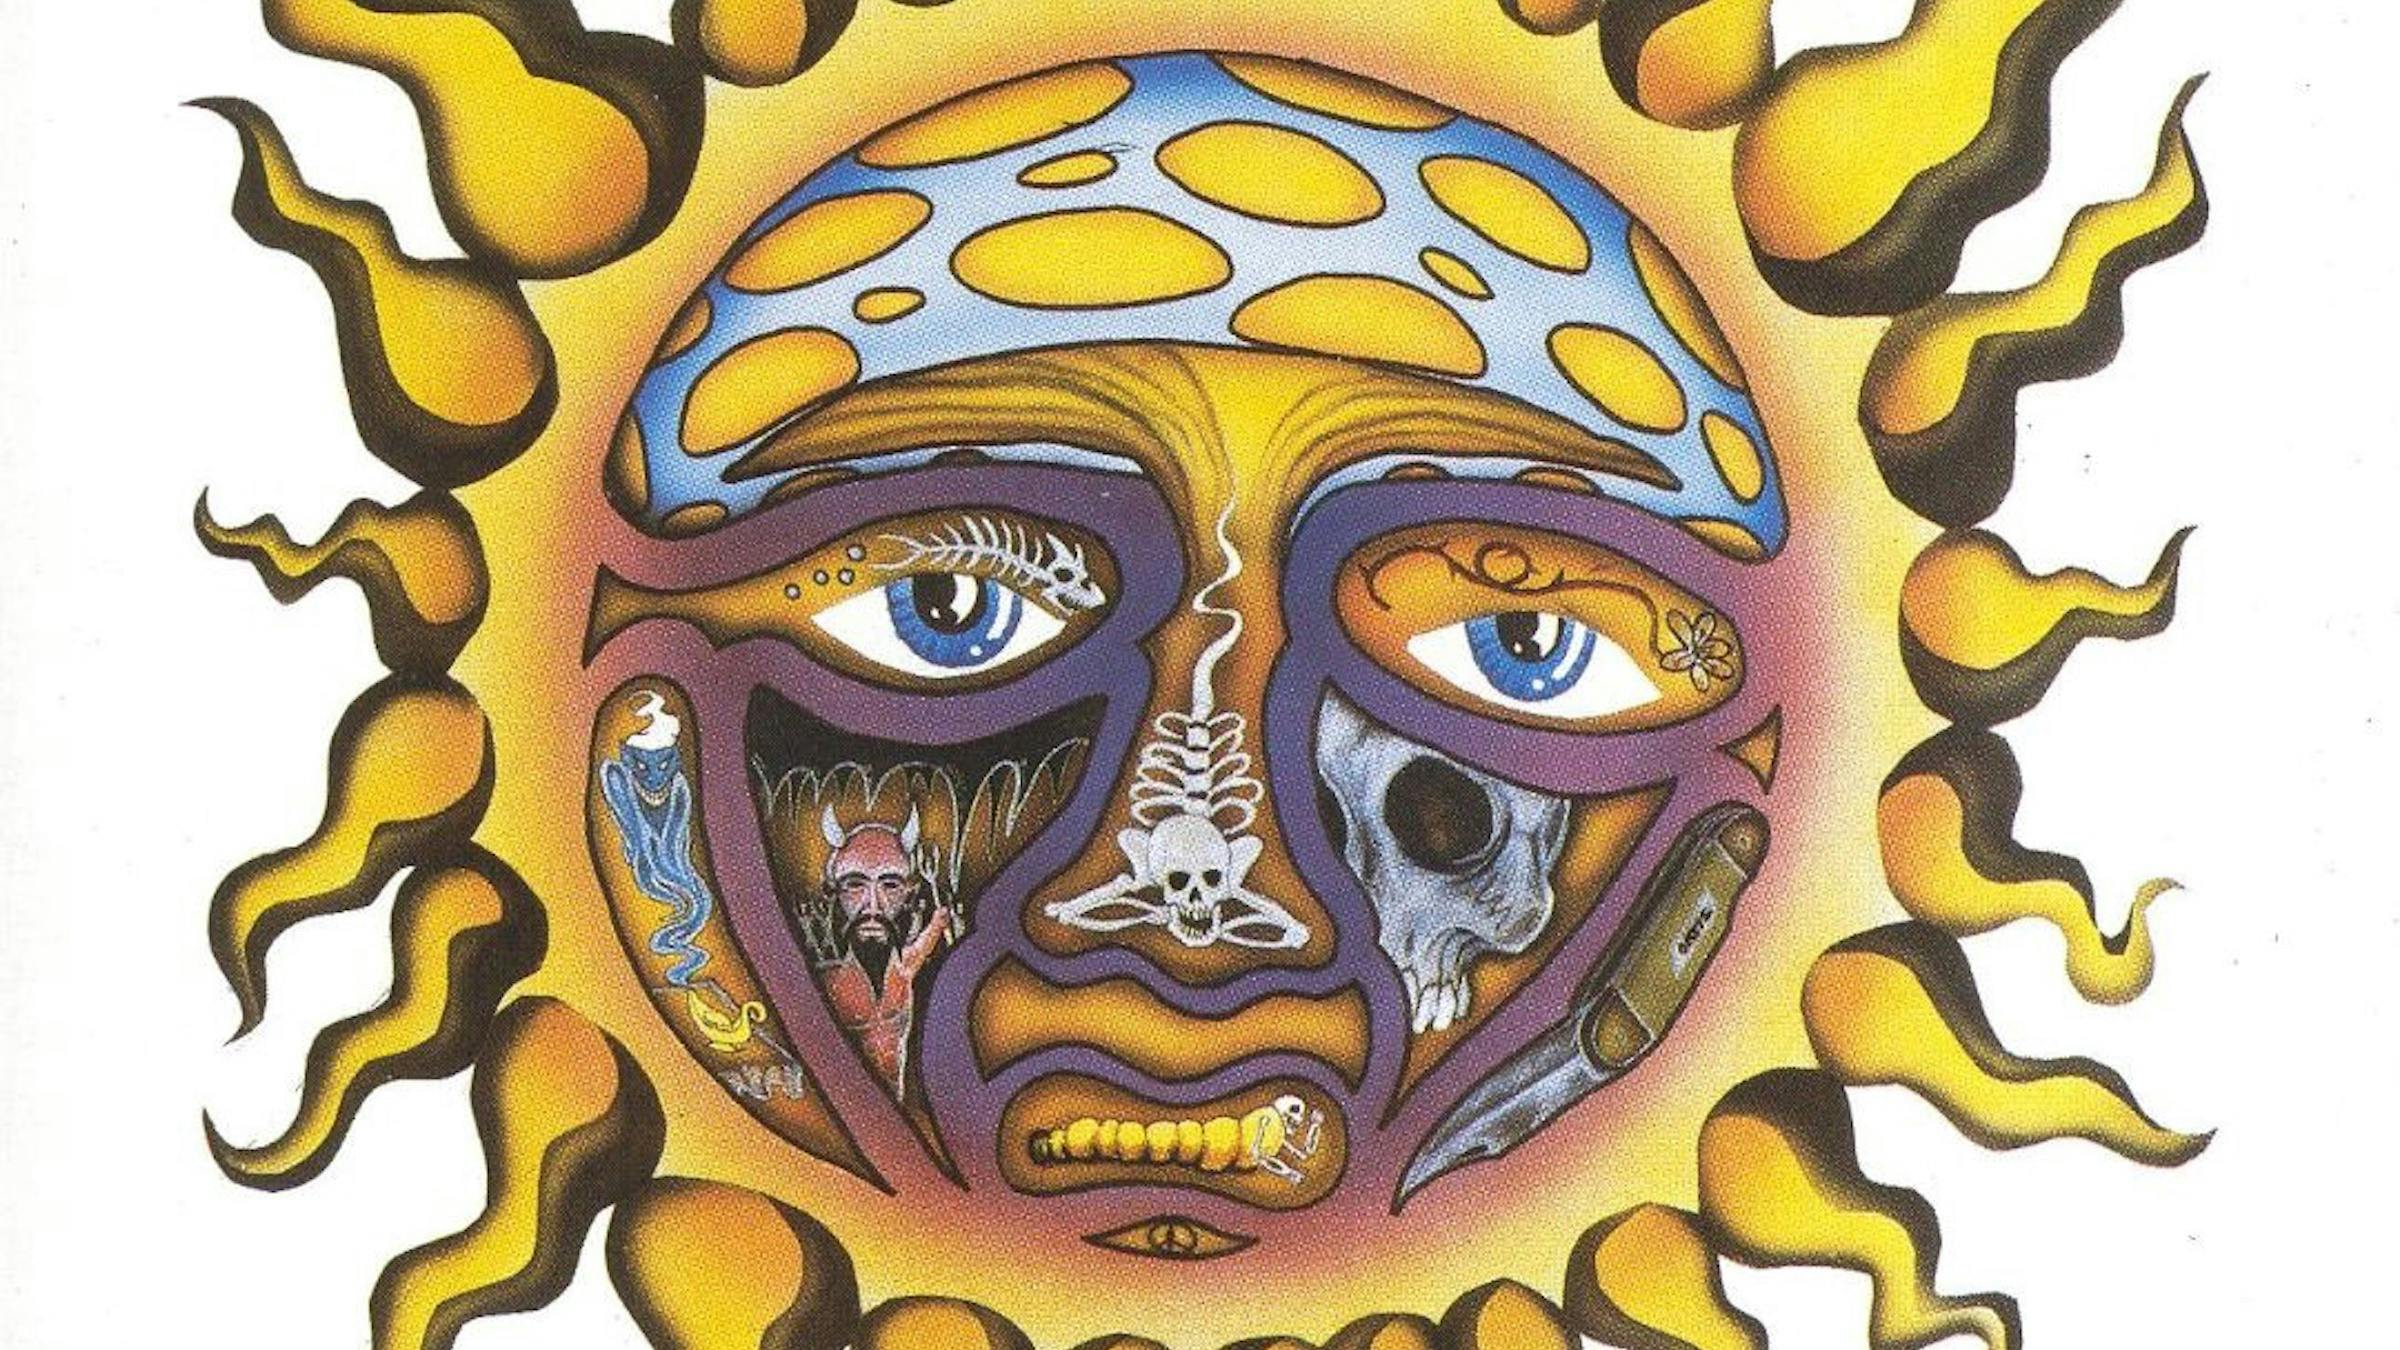 "And Furthermore, Susan": The Origin Of Sublime's Infamous Sample